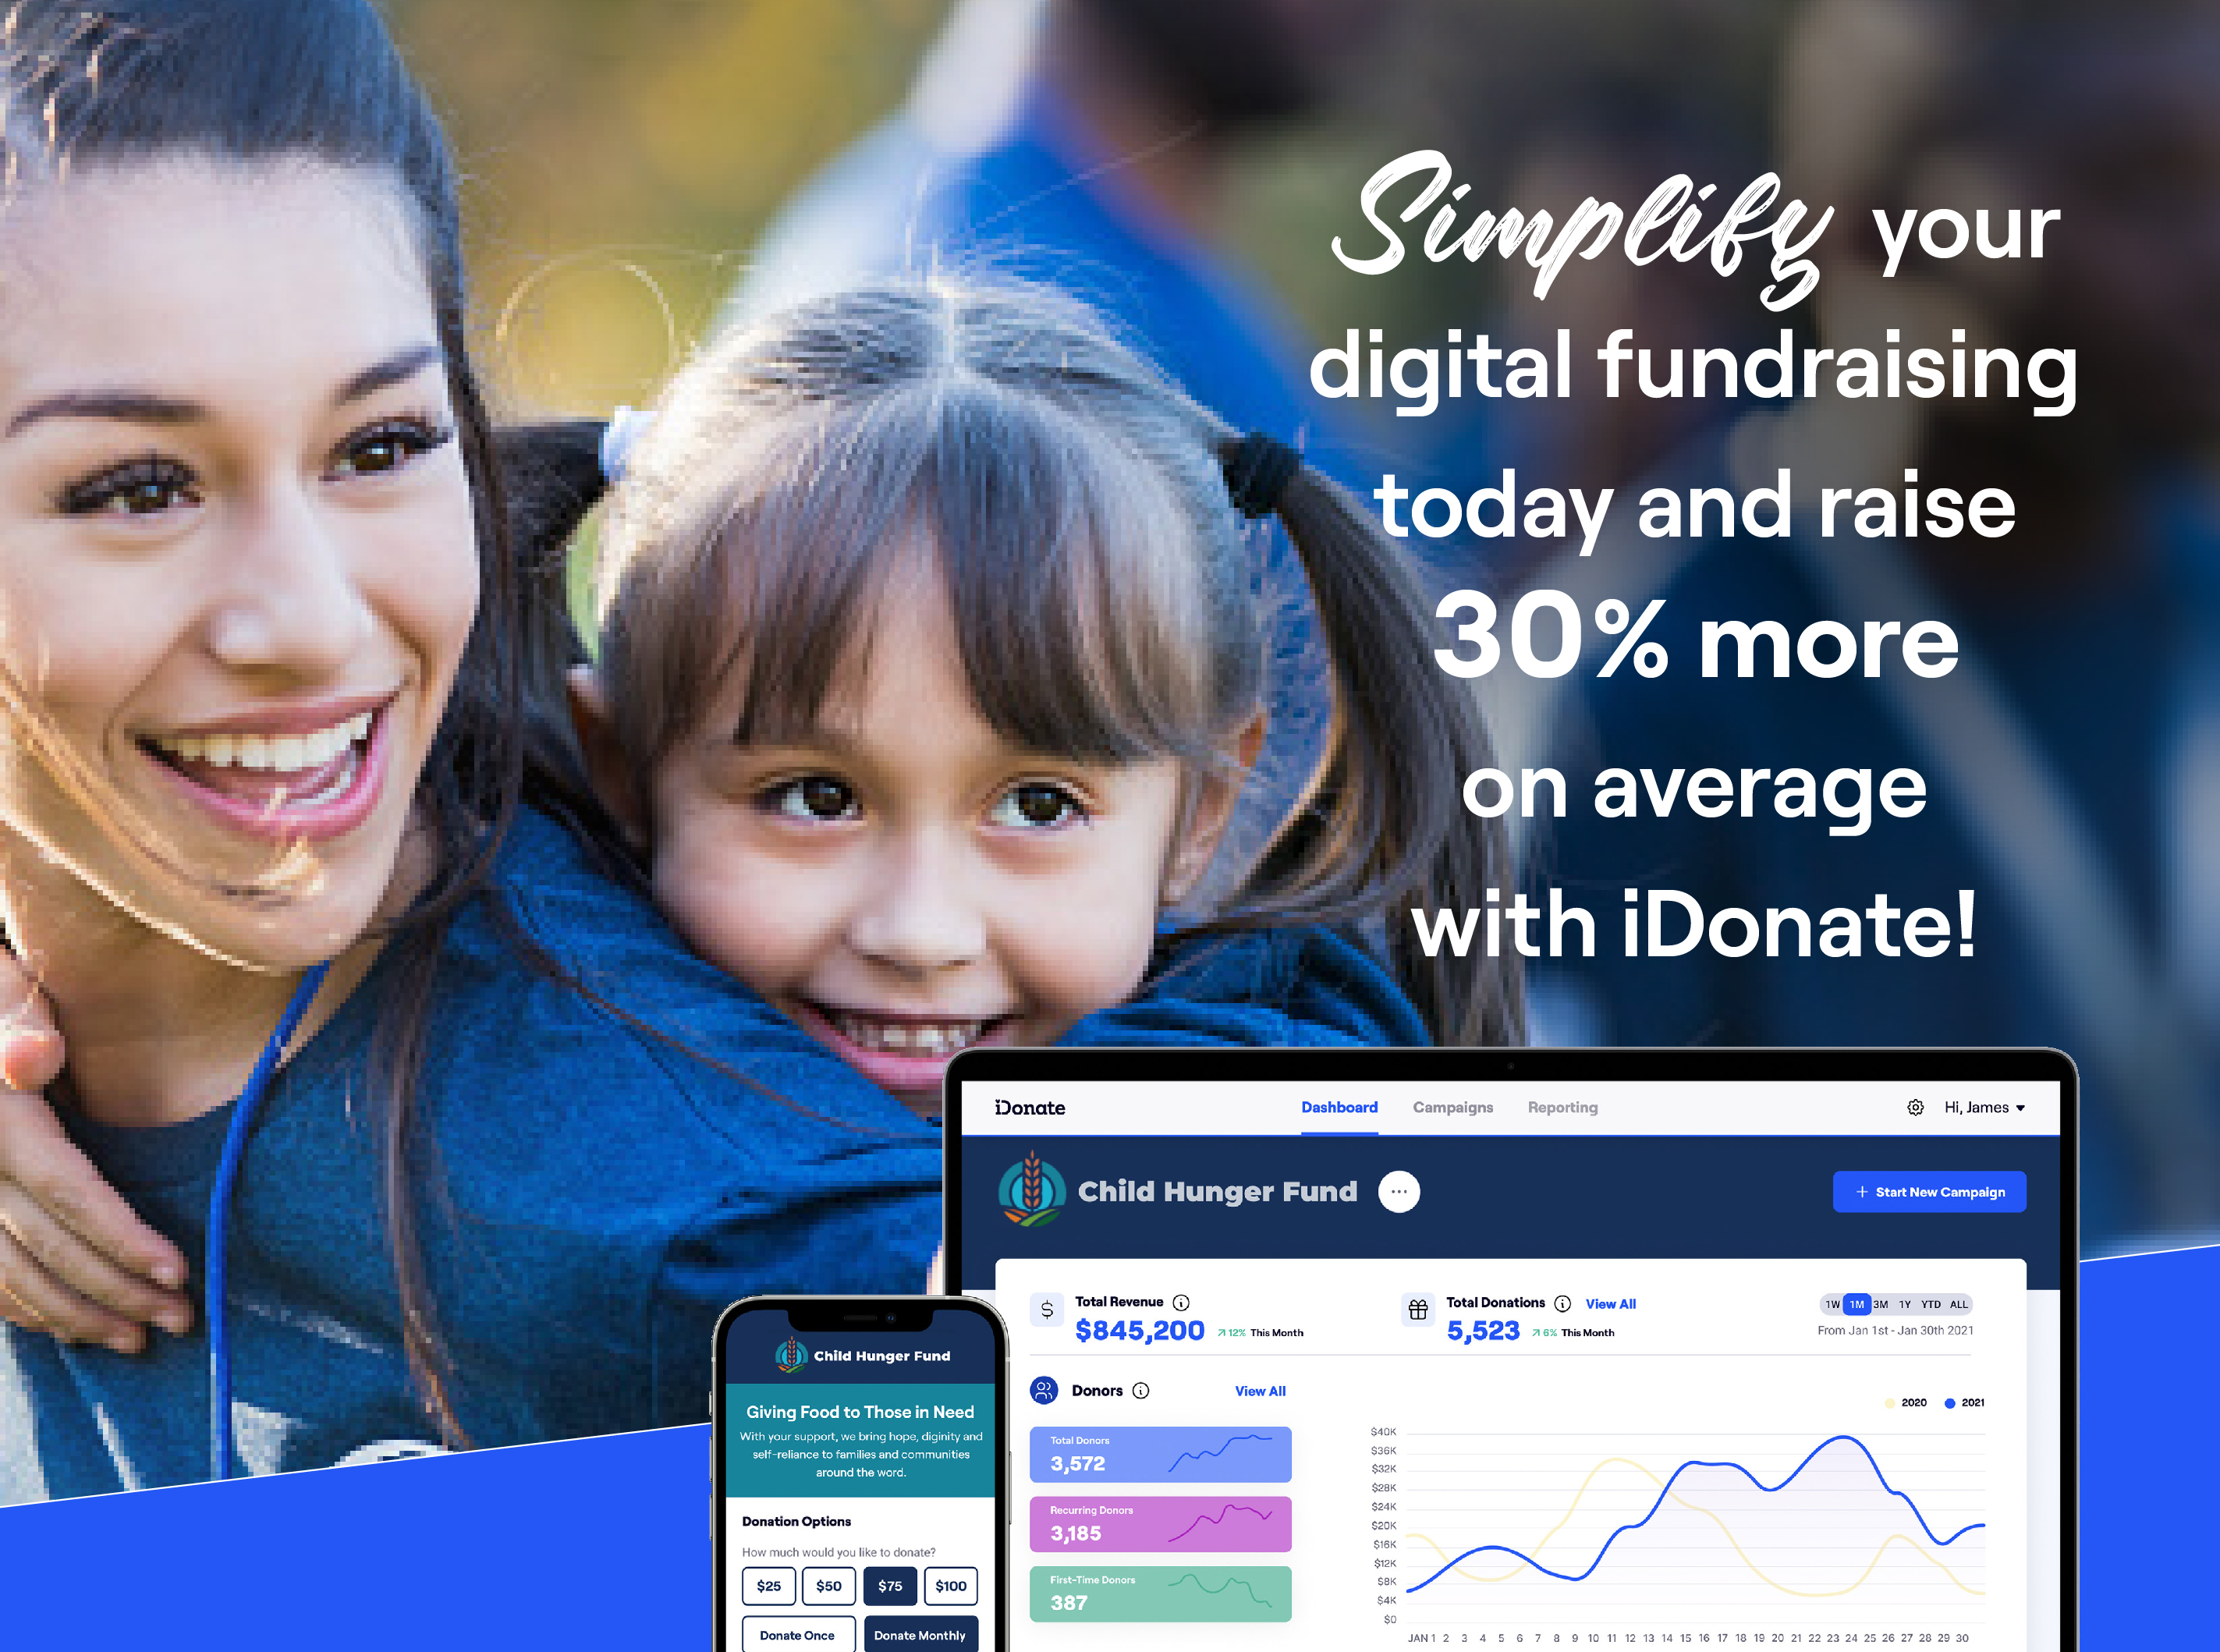 Digital Fundraising Simplified! Simple tools. Simple configurations & integrations. Simple execution of intelligent fundraising & conversion strategies. All on a foundation of shared values and a focus on their mission, with unrivaled customer service.